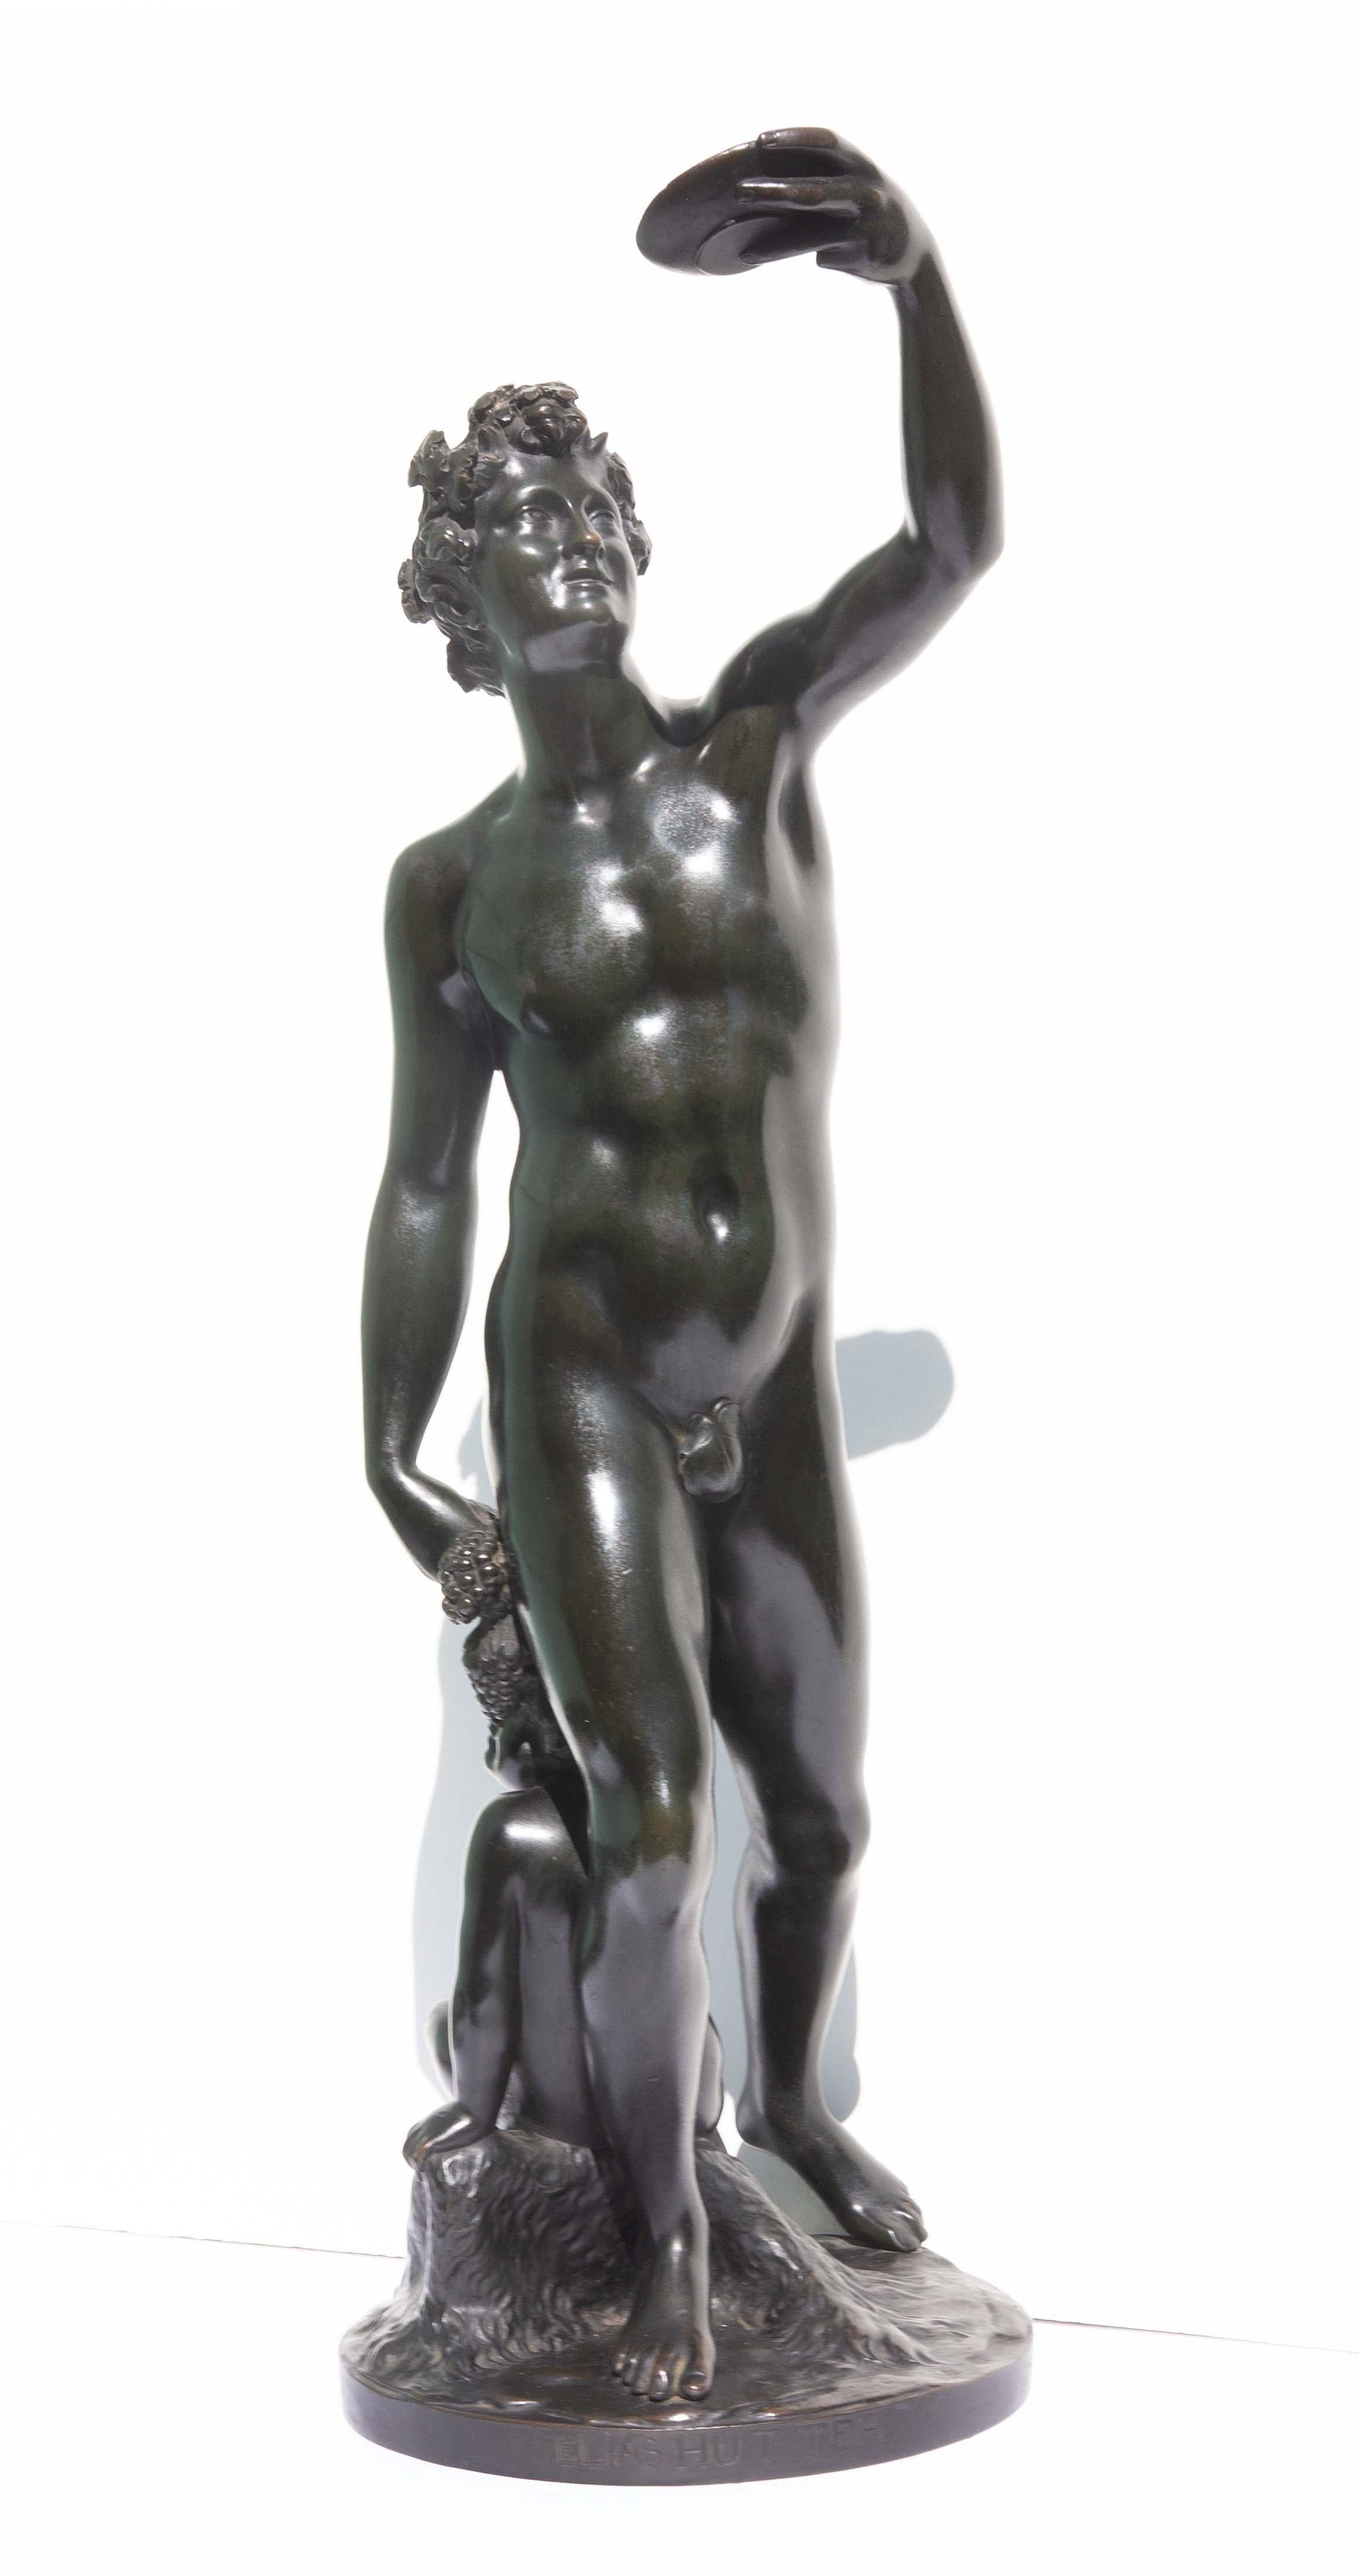 Neoclassical bronze sculpture of a young Bacchus and fawn making an offering Elias Hutter. Very fine casting with a rich patina. Early to Mid-19th Century.
Elias Hutter: (Vienna 1774 - 1865): studied at the Vienna Academy, 1789 apprentice under